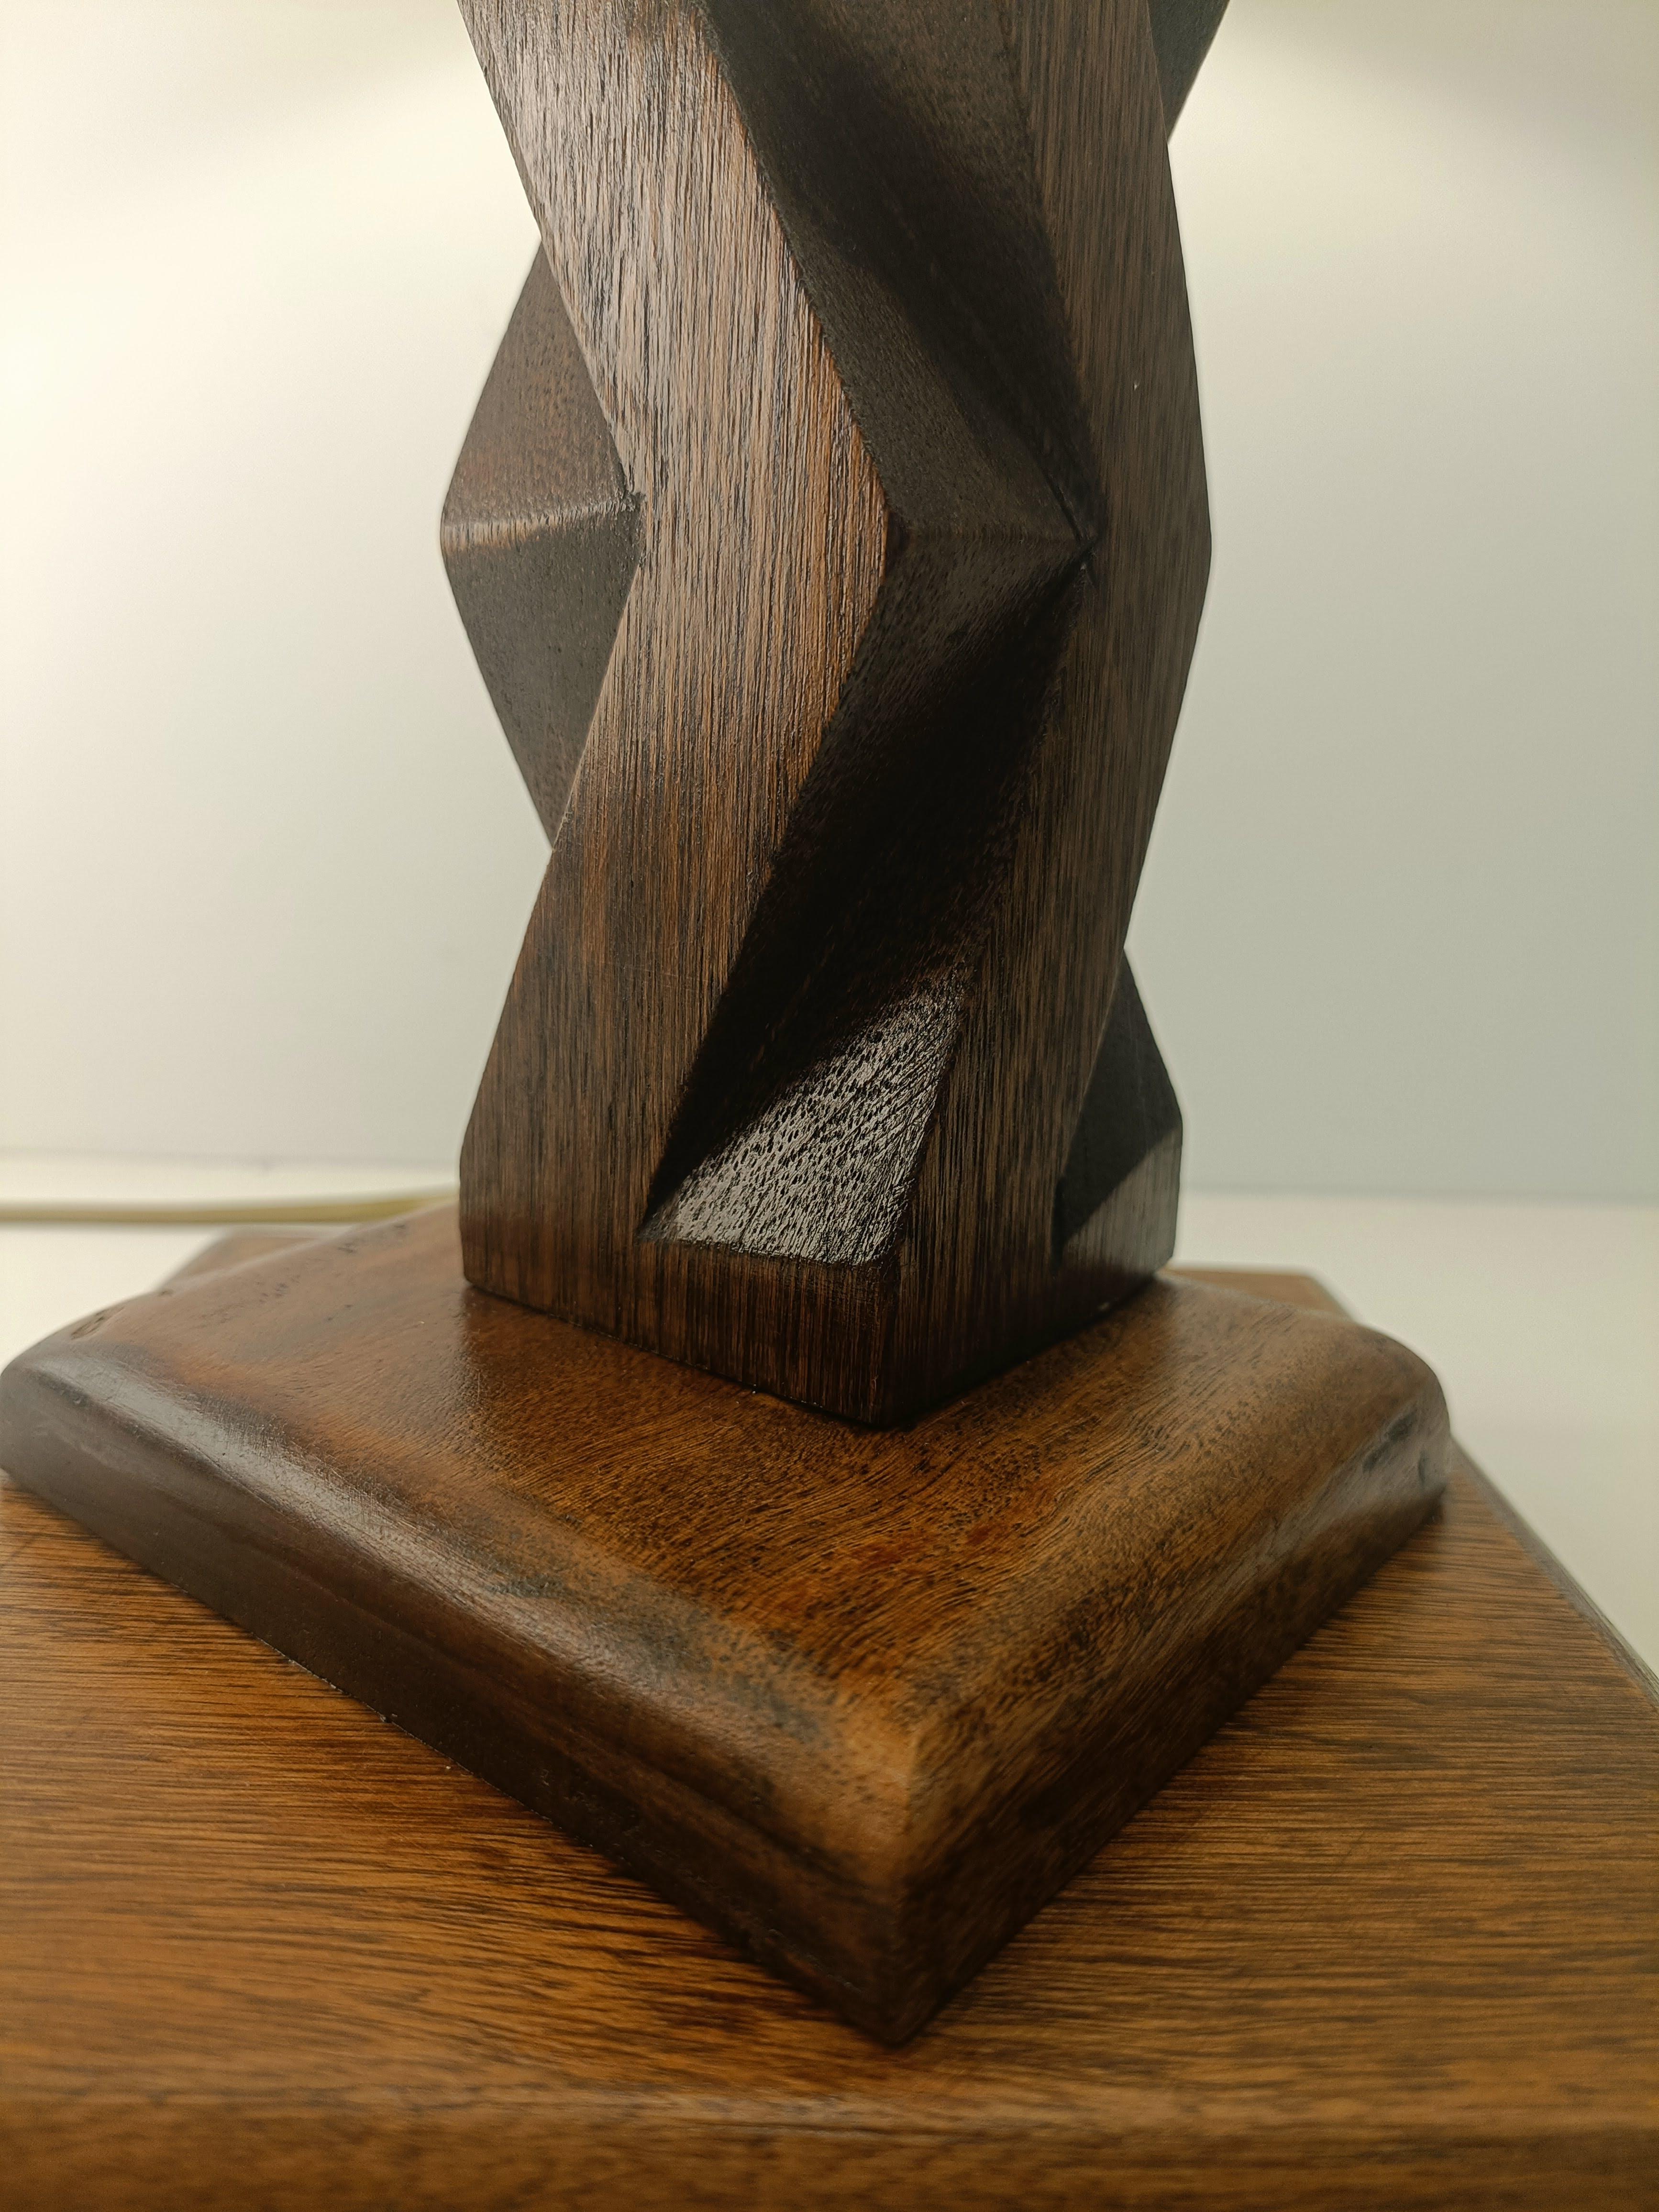 Sculptural Brutalist French Wood Lamp circa 1950 like Constantin Brancusi In Good Condition For Sale In Paris, FR